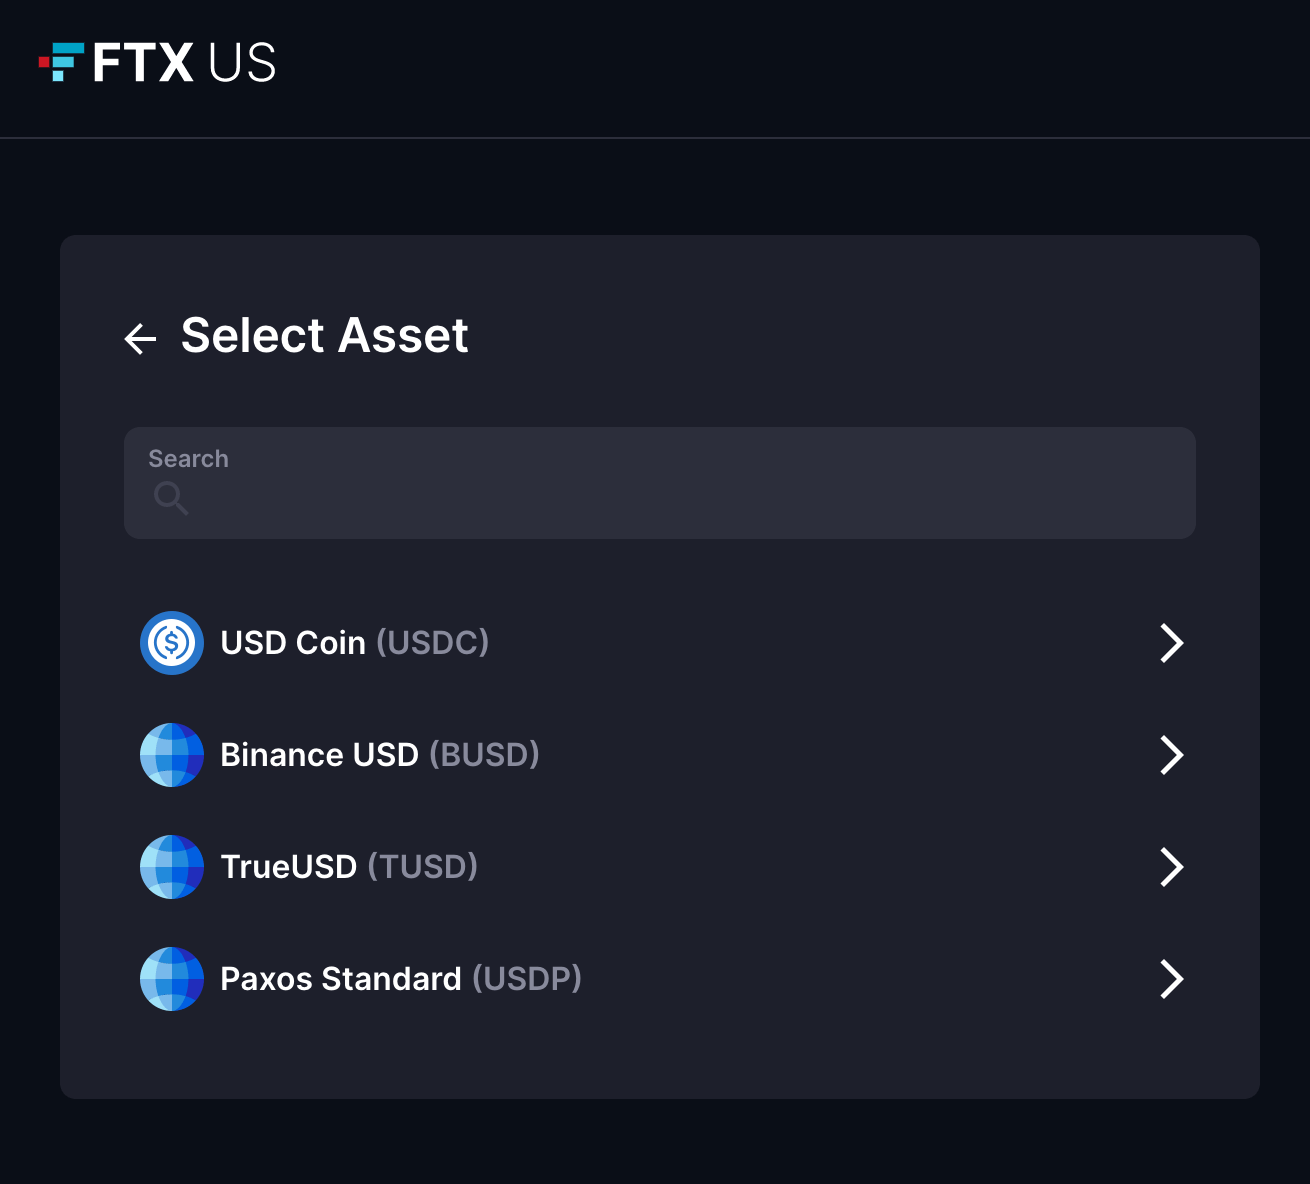 Deposit your stablecoin to FTX